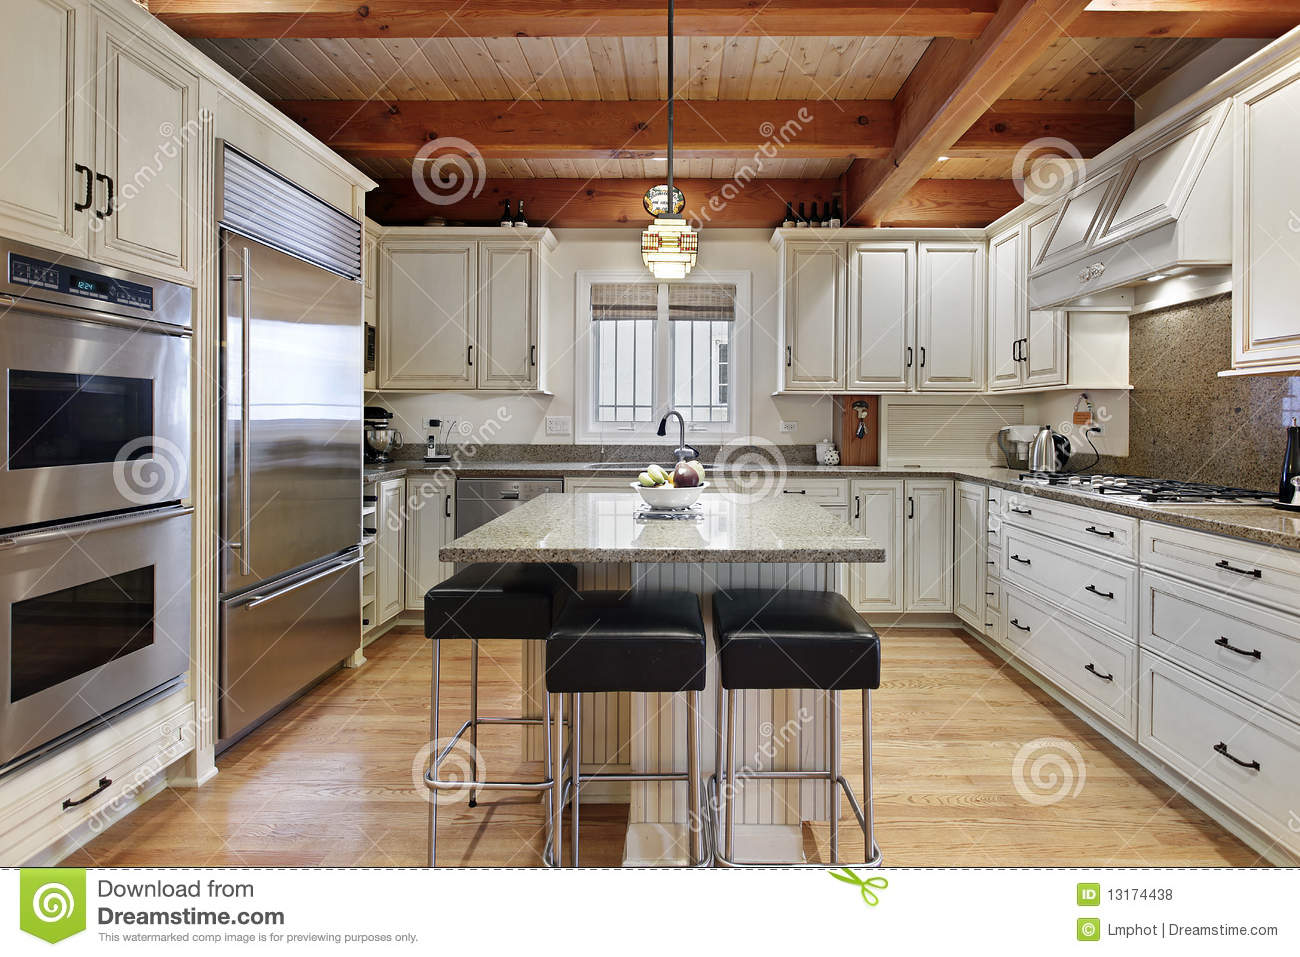 Kitchen With Center Island Royalty Free Stock Photos   Image  13174438